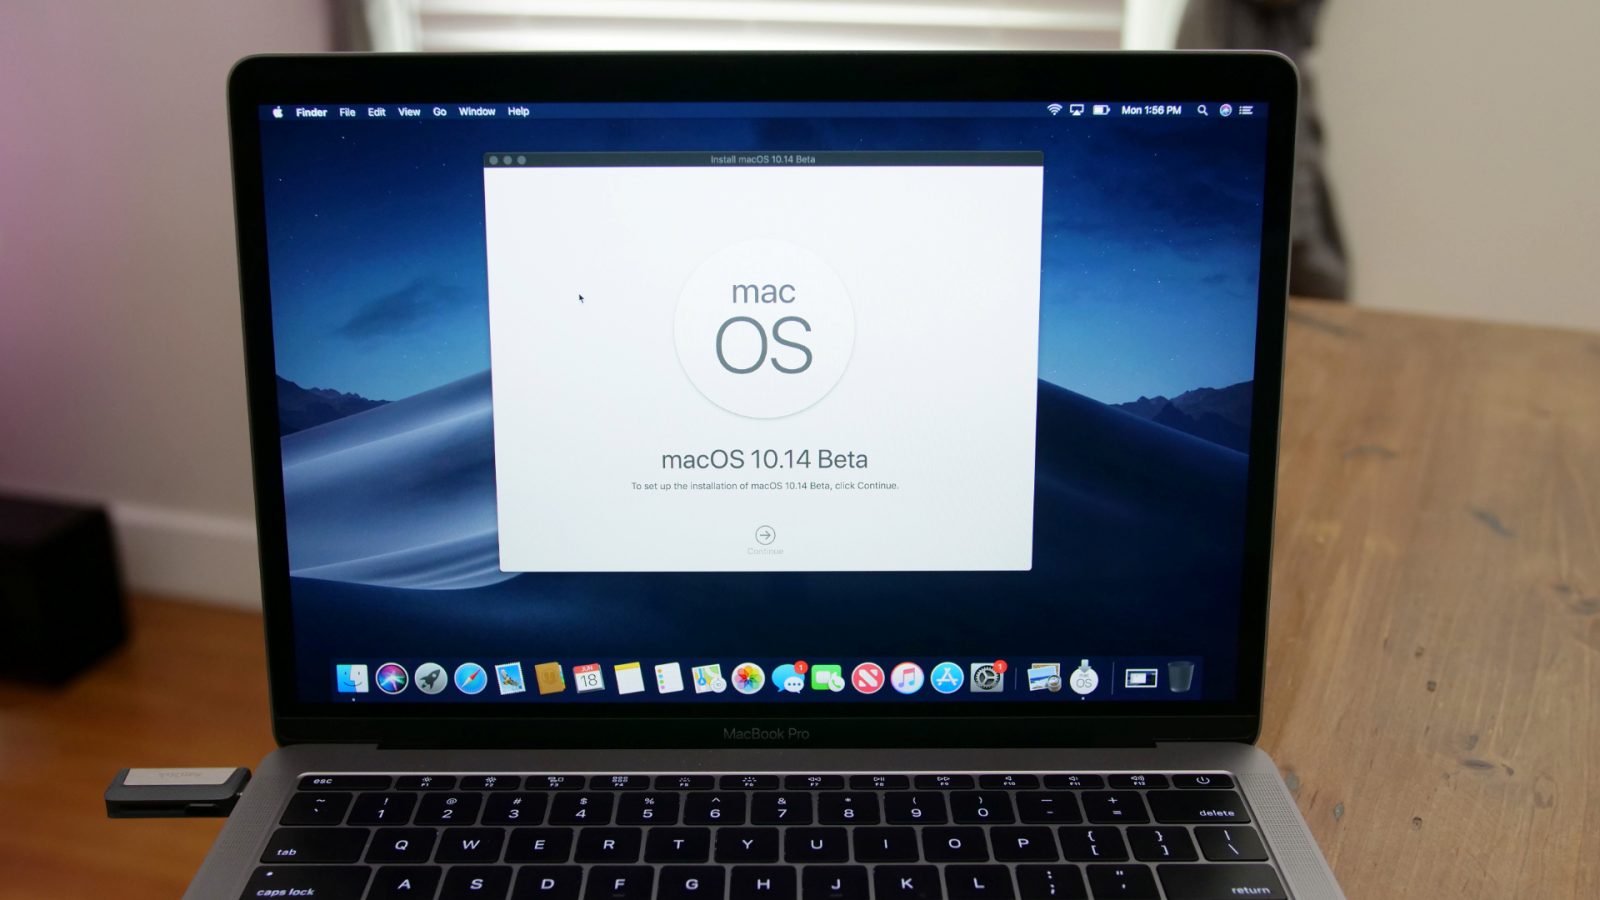 Flash download guide for macbook pro